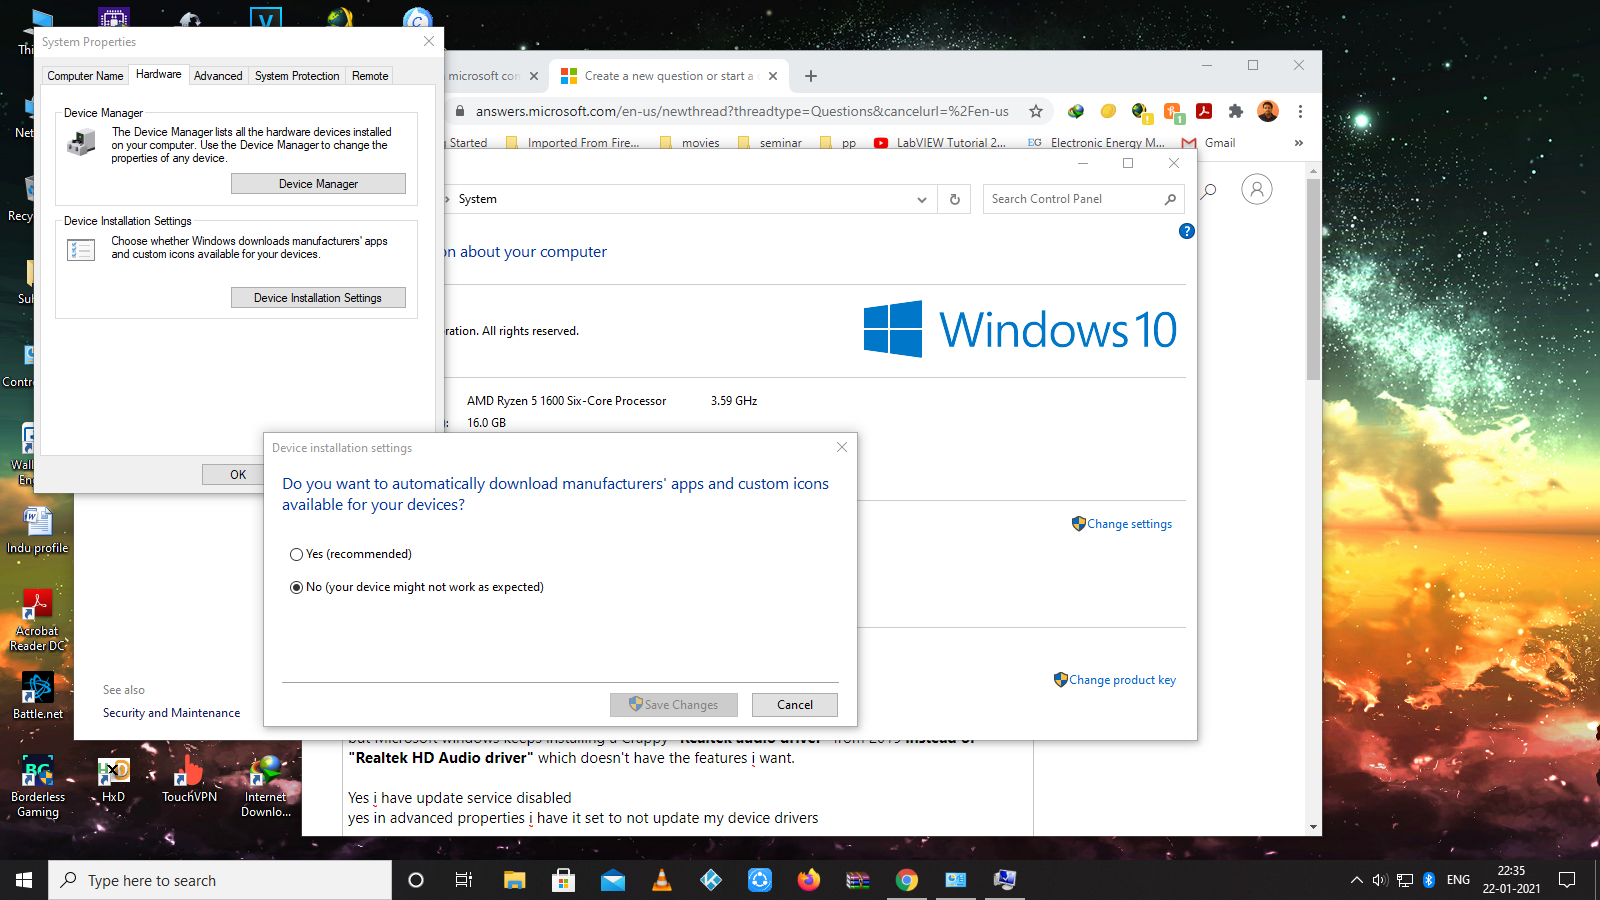 Windows 10 updates Realtek HD Audio Drivers to a bad one regardless of my settings Please... 094dd663-6a48-4a1a-acd6-496d9bdabdb3?upload=true.png